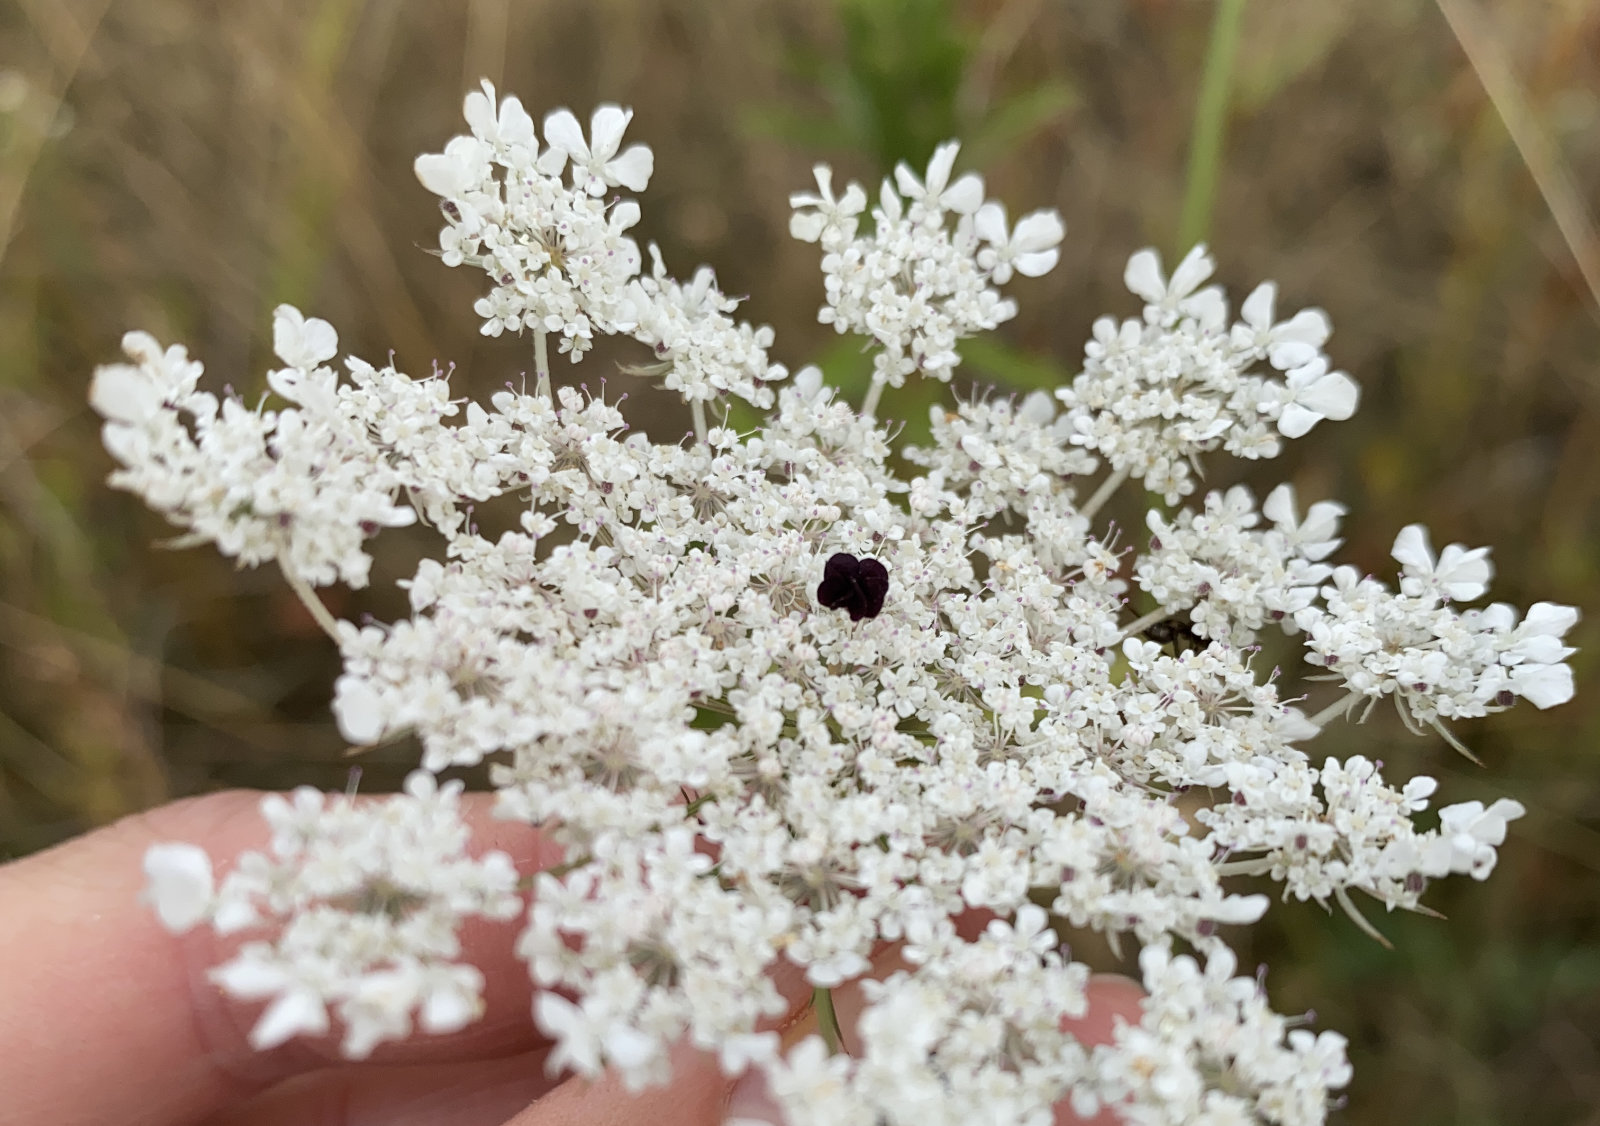 A closeup of a Queen Anne’s Lace flower with the characteristic black spot at the center.